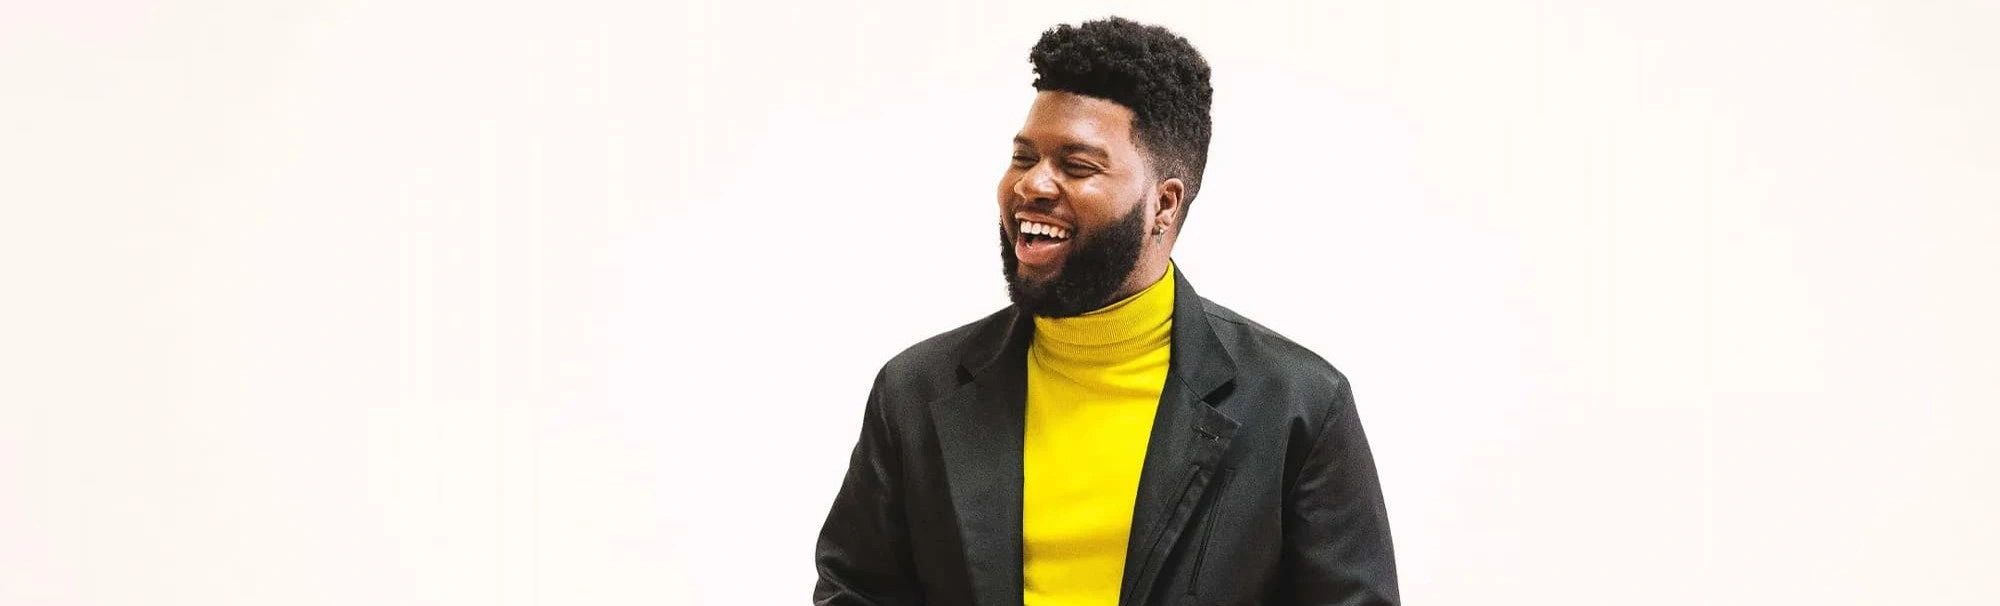 Khalid's incredible concert in Dubai is the first performance of a global superstar!